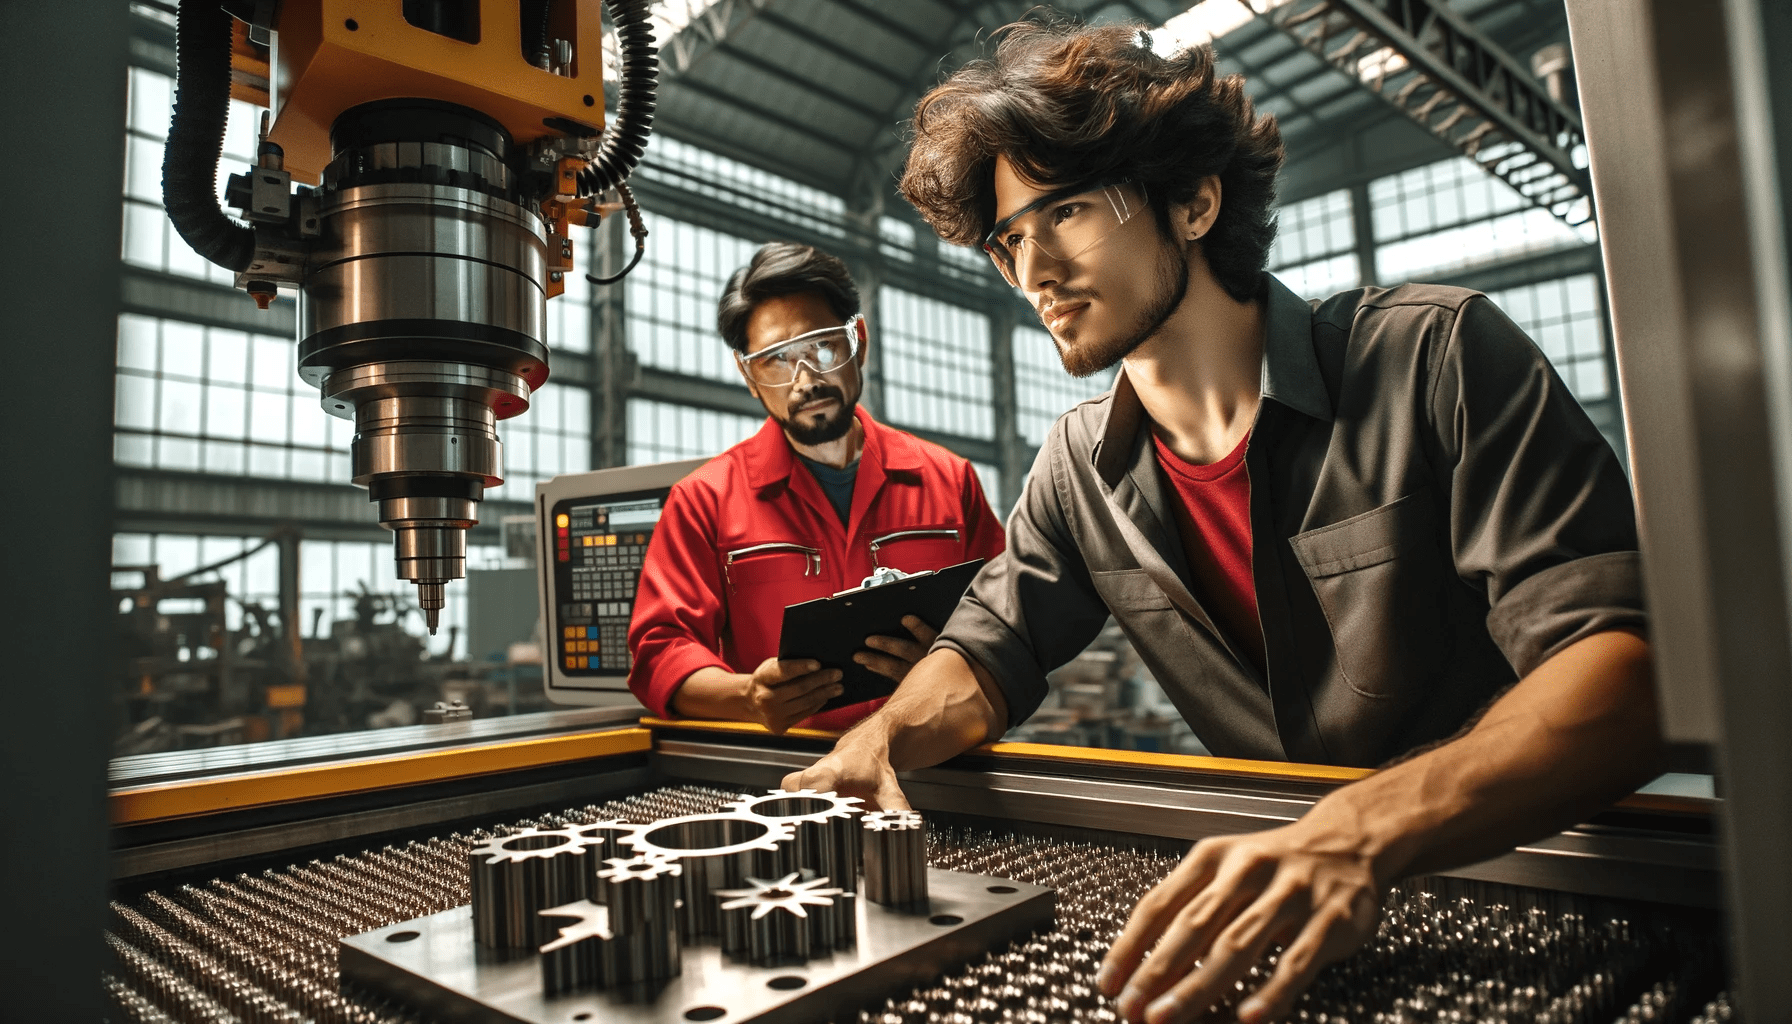 CNC machinist, with medium-length curly hair, wearing a red work shirt and safety goggles, is programming a CNC machine. The enviro